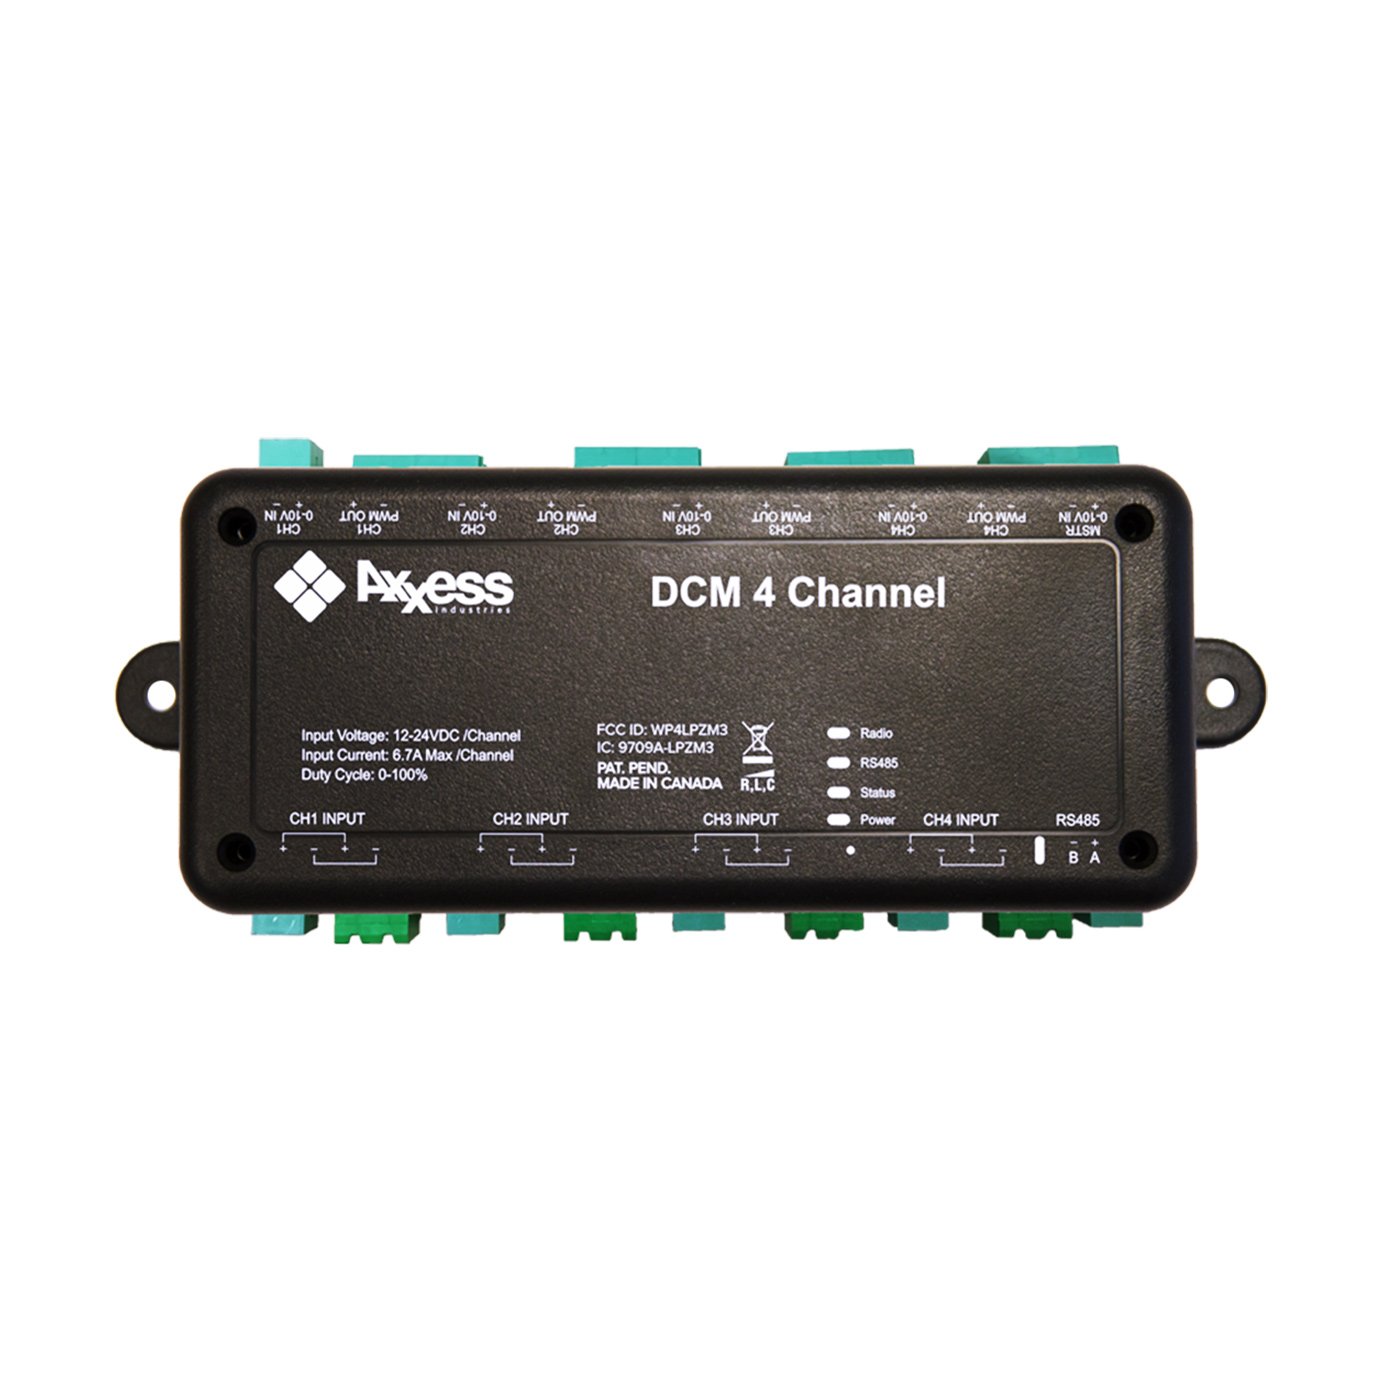 theory pinch Plausible Shop DCM4 - LED Light Dimming - LED Driver - Control4 Integration / ZigBee